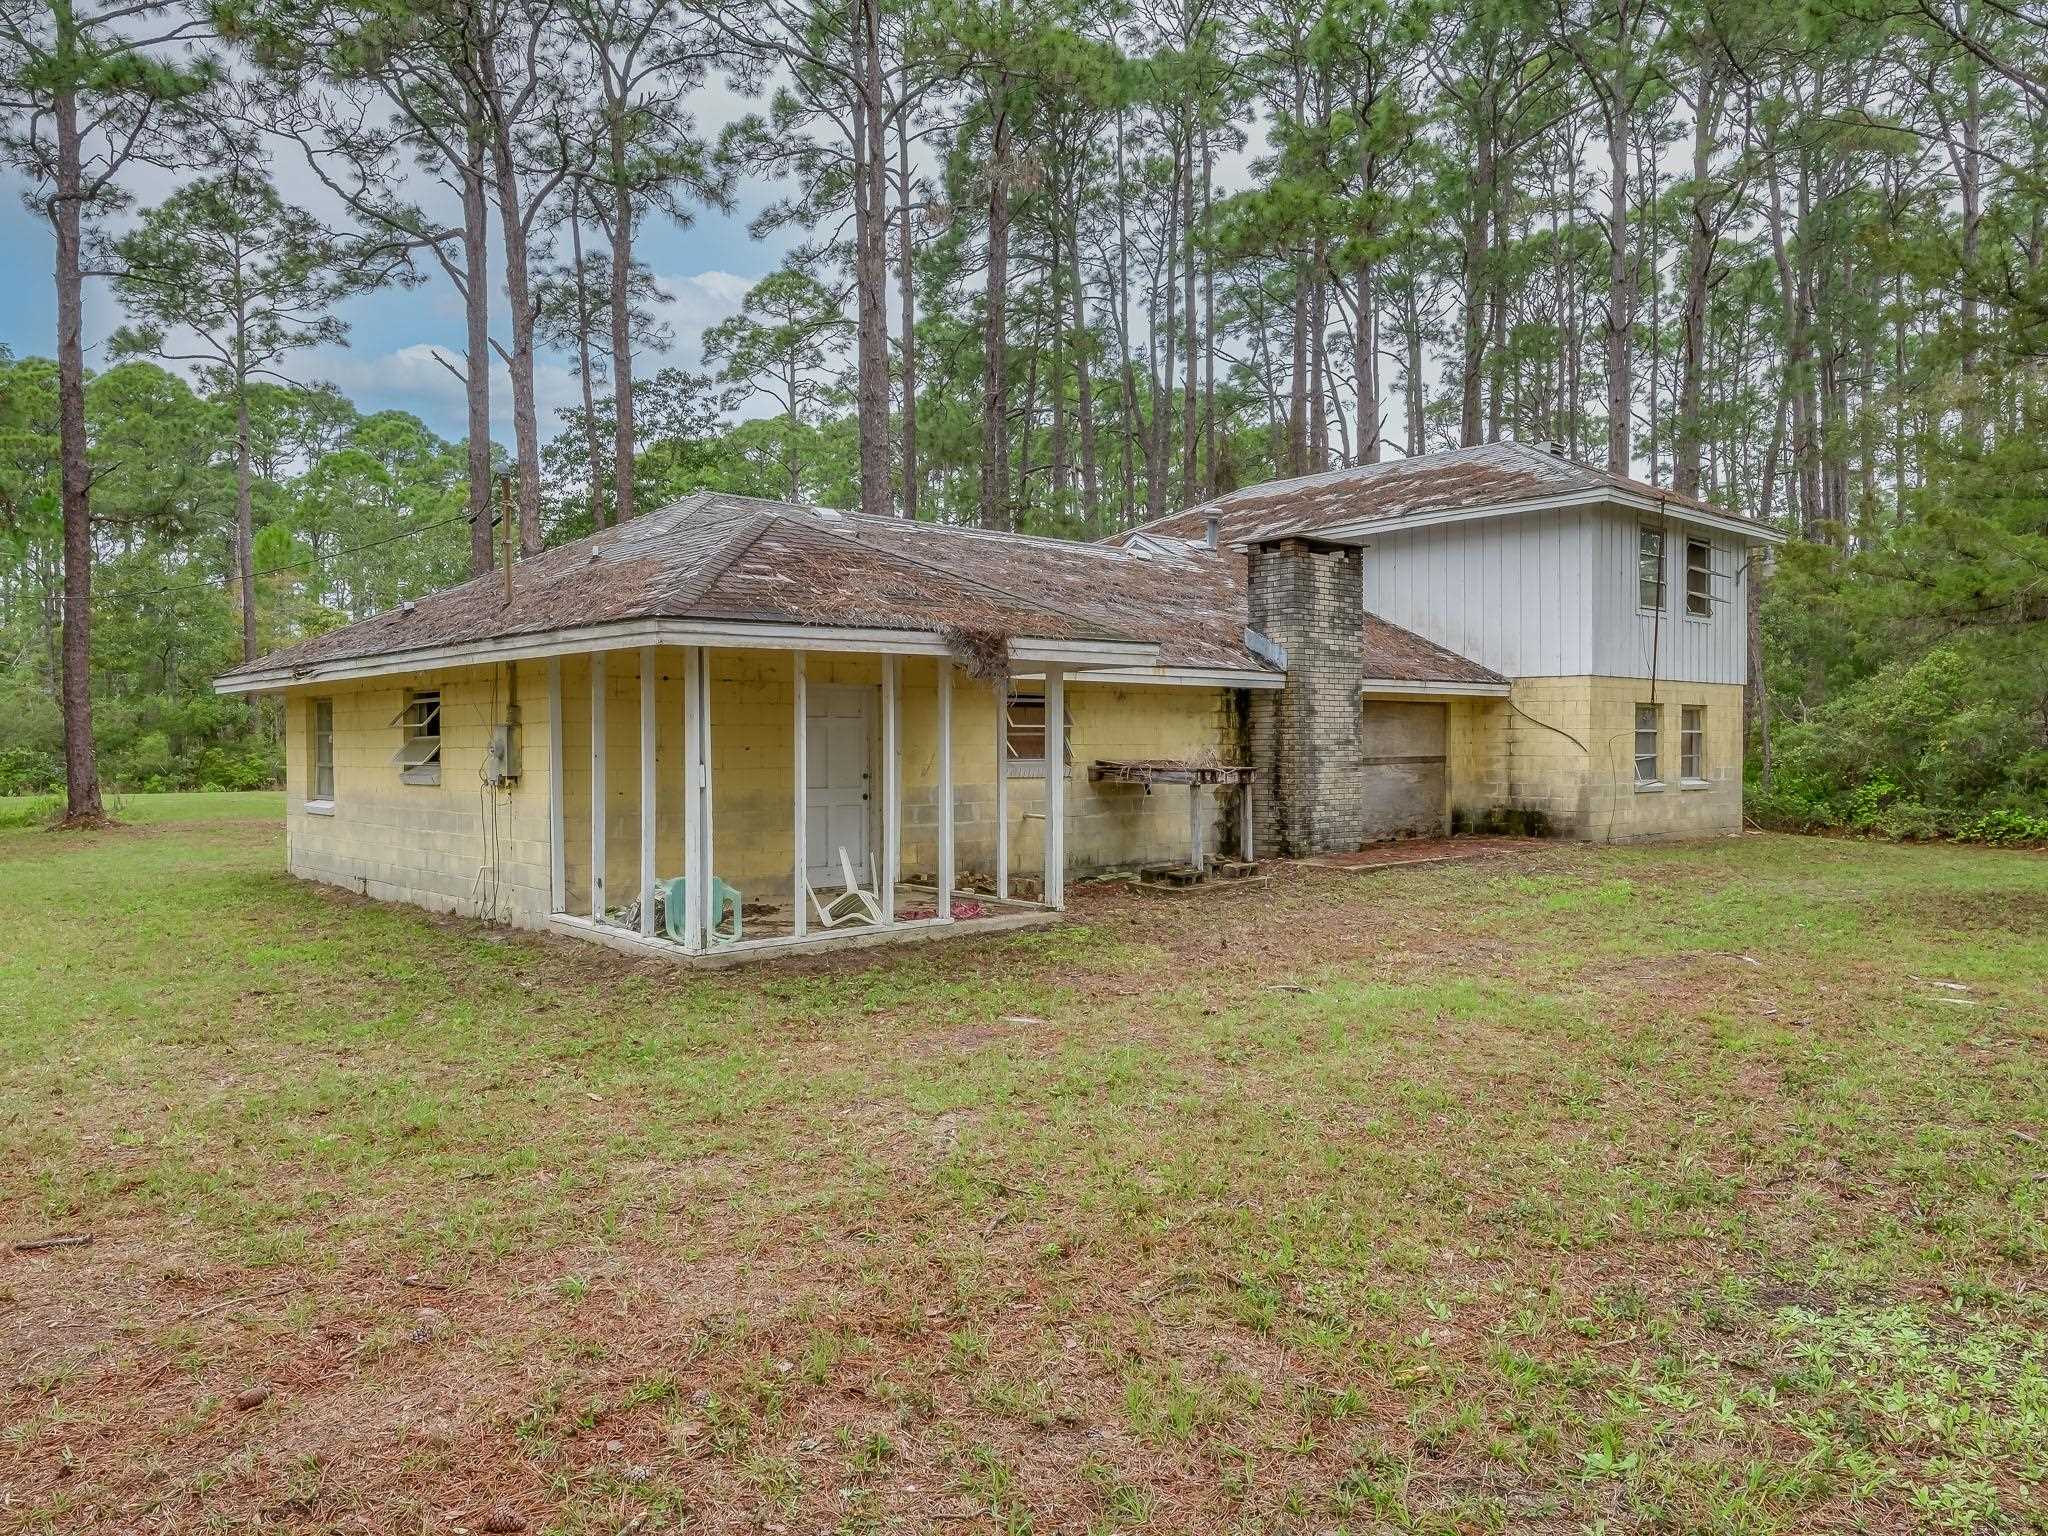 216 Levy bay,PANACEA,Florida 32346,Lots and land,Levy bay,369850